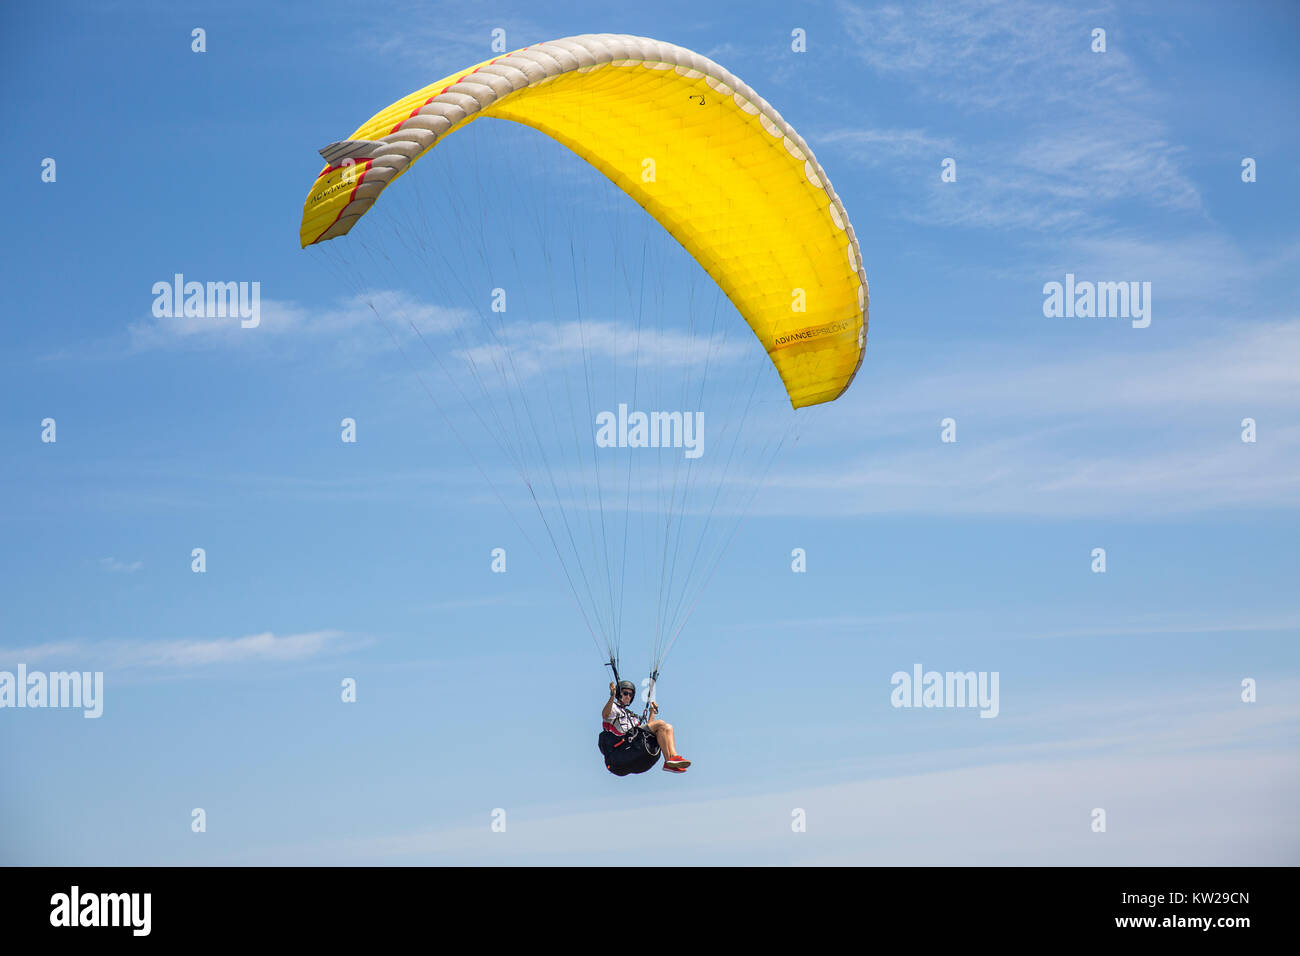 Man enjoying paragliding above Long Reef Point on Sydney northern beaches,NSW, Australia, yellow canopy against blue sky Stock Photo